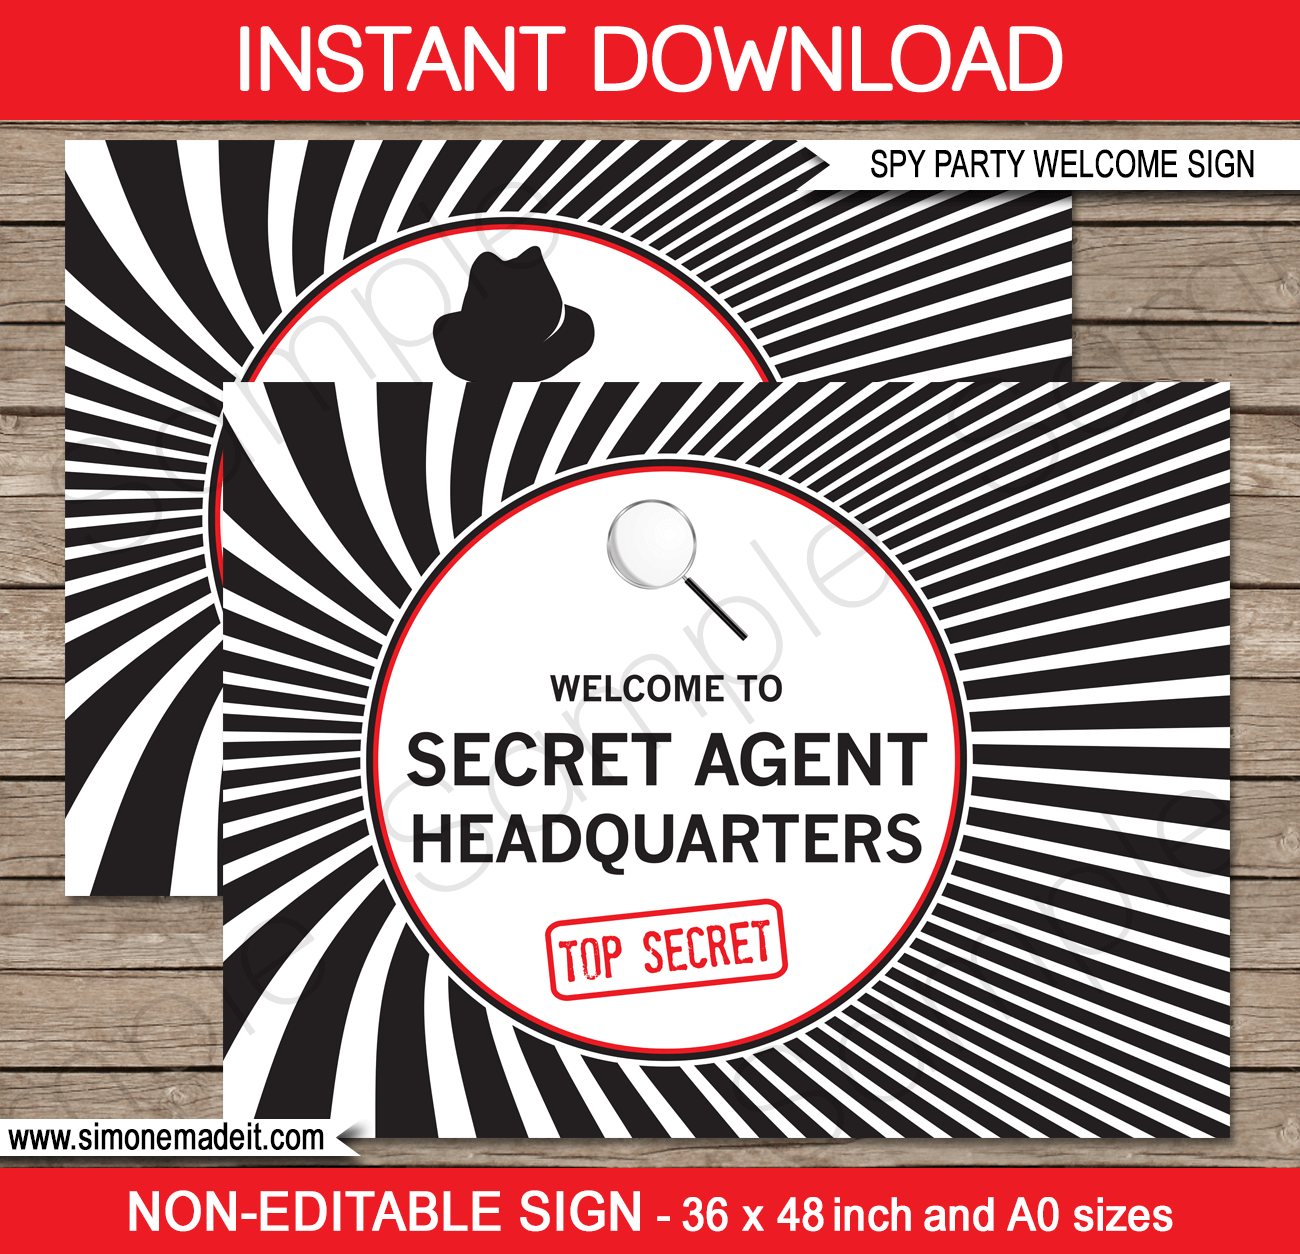 Spy Party Backdrop Welcome Sign | Welcome to Secret Agent Headquarters | Printable DIY Template | Party Decorations | $4.50 Instant Download via SIMONEmadeit.com